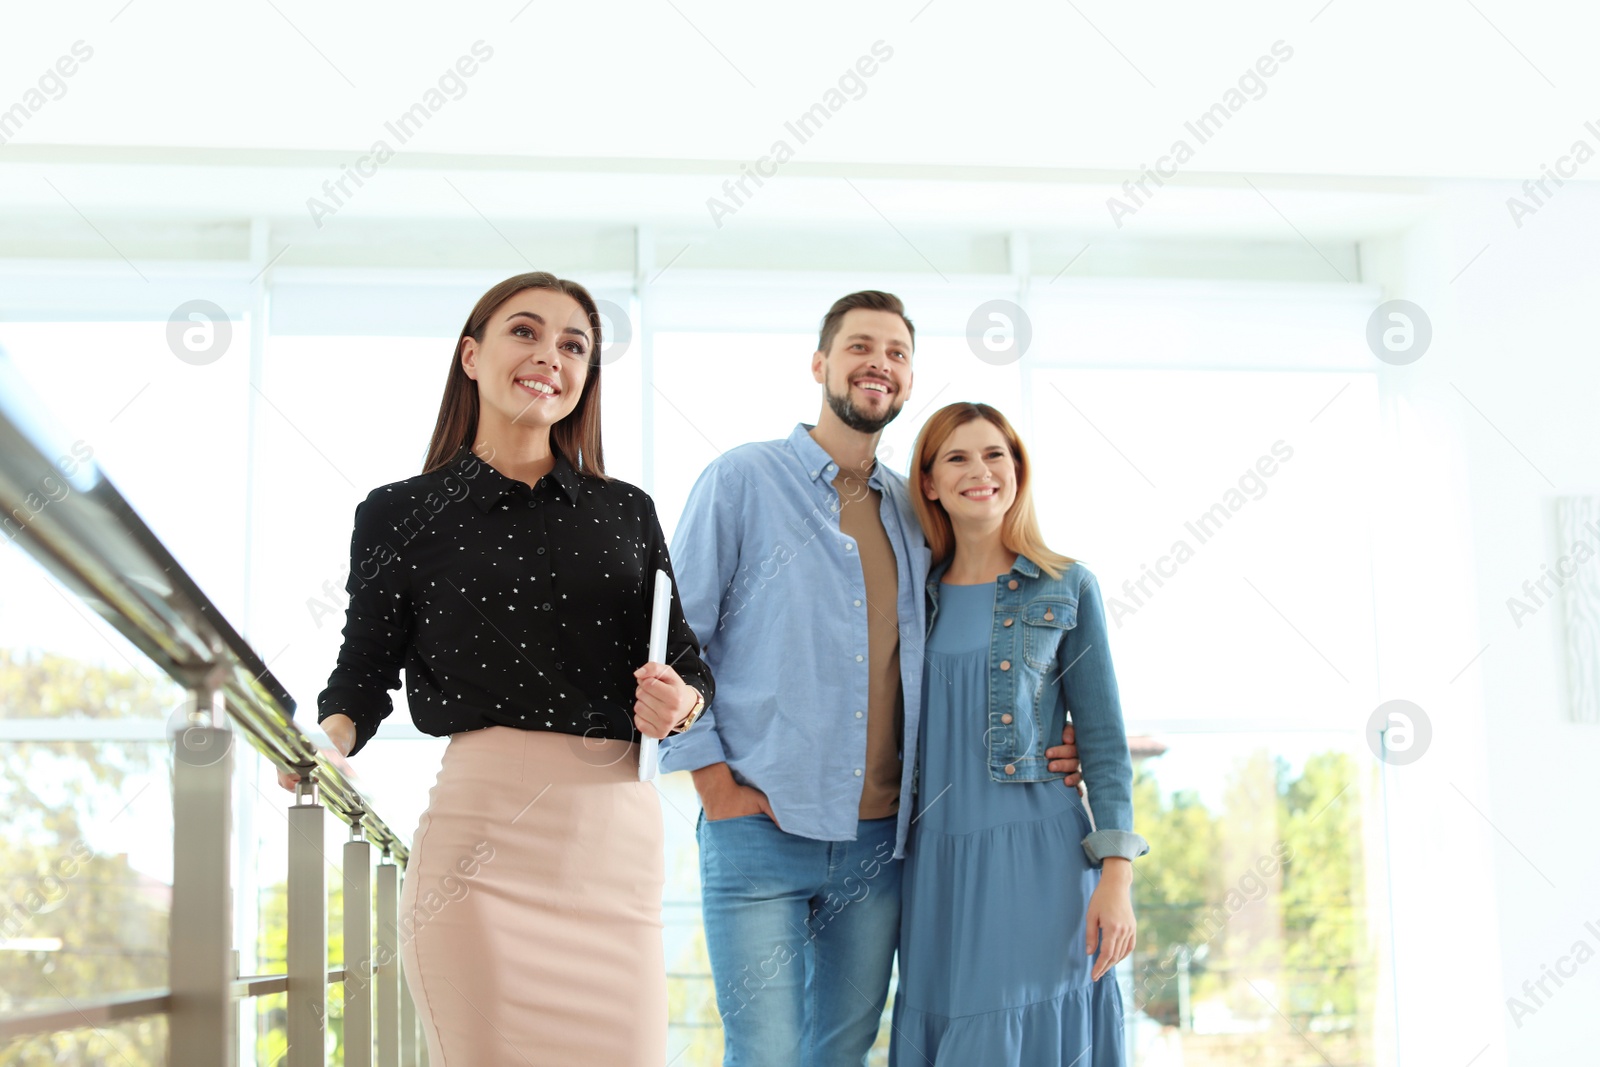 Photo of Female real estate agent showing new house to couple, indoors